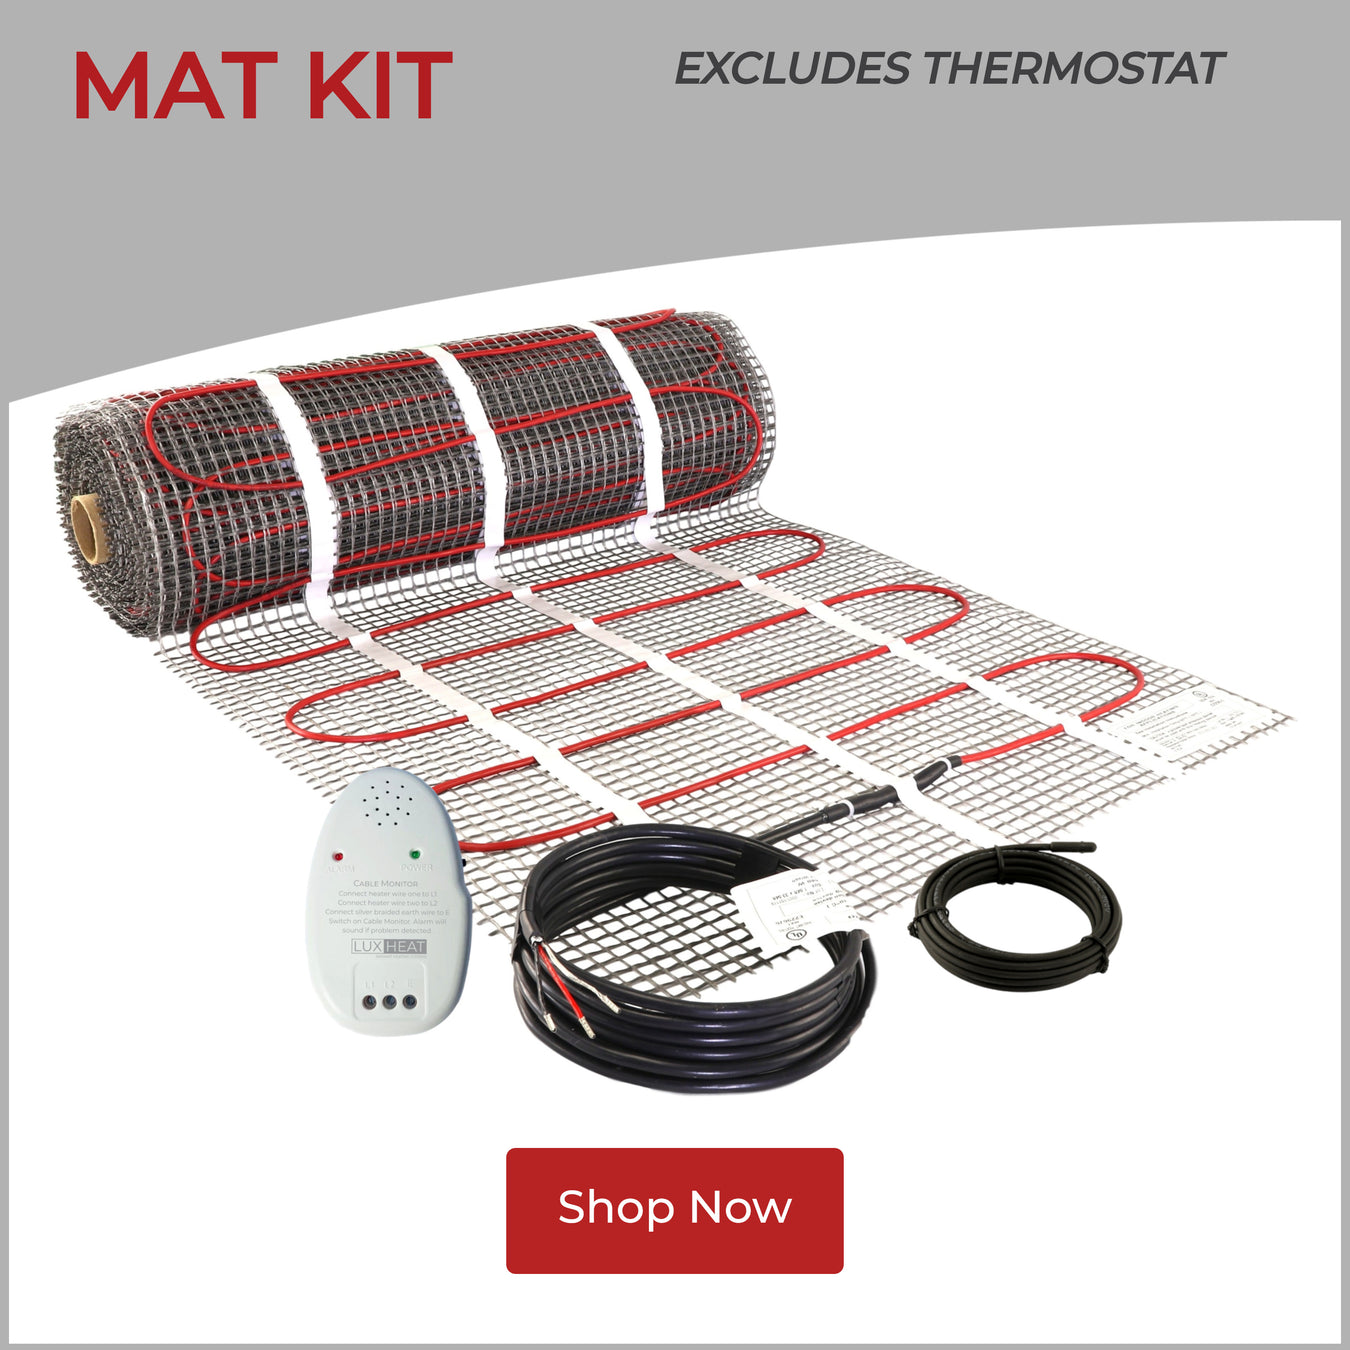 Overview_-_Mat_Kit_without_Thermostat